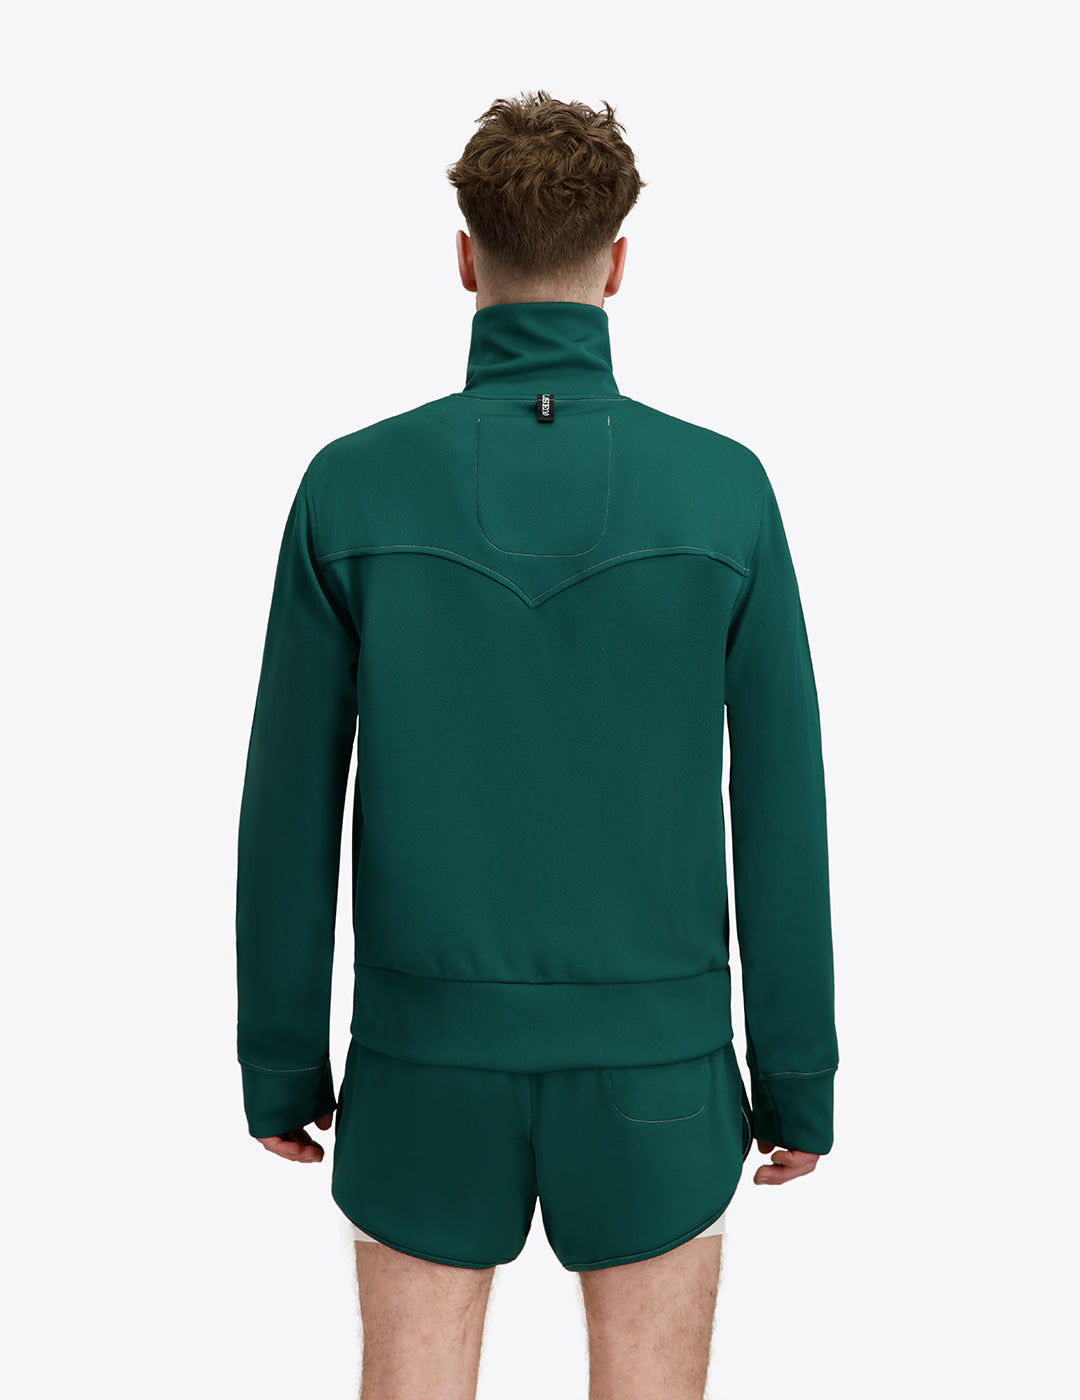 THE 70S TRACK TOP IN GREEN